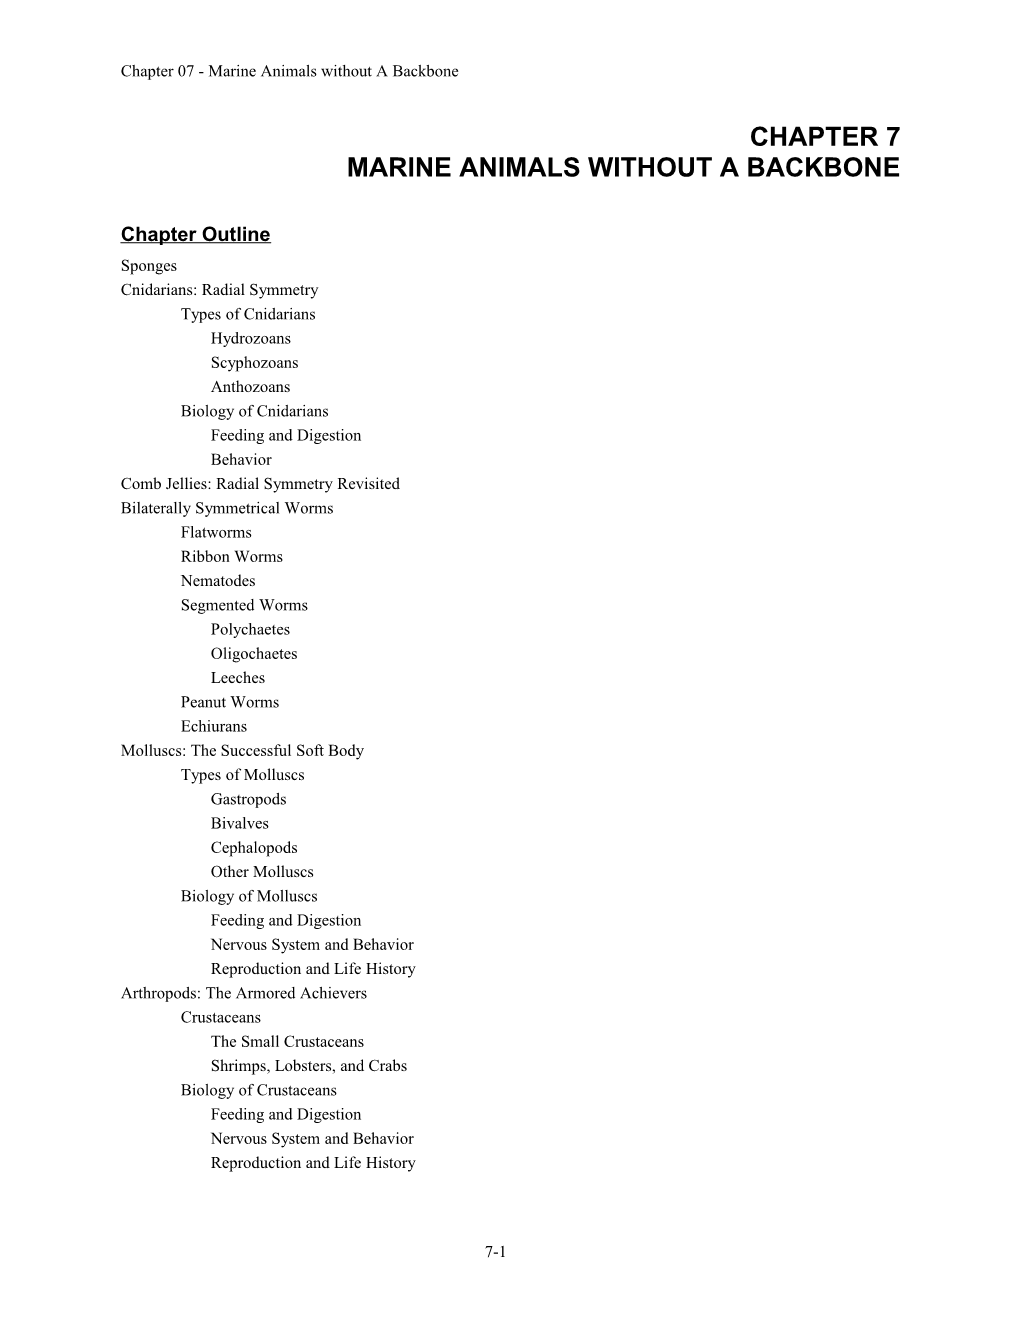 Chapter 07 - Marine Animals Without a Backbone